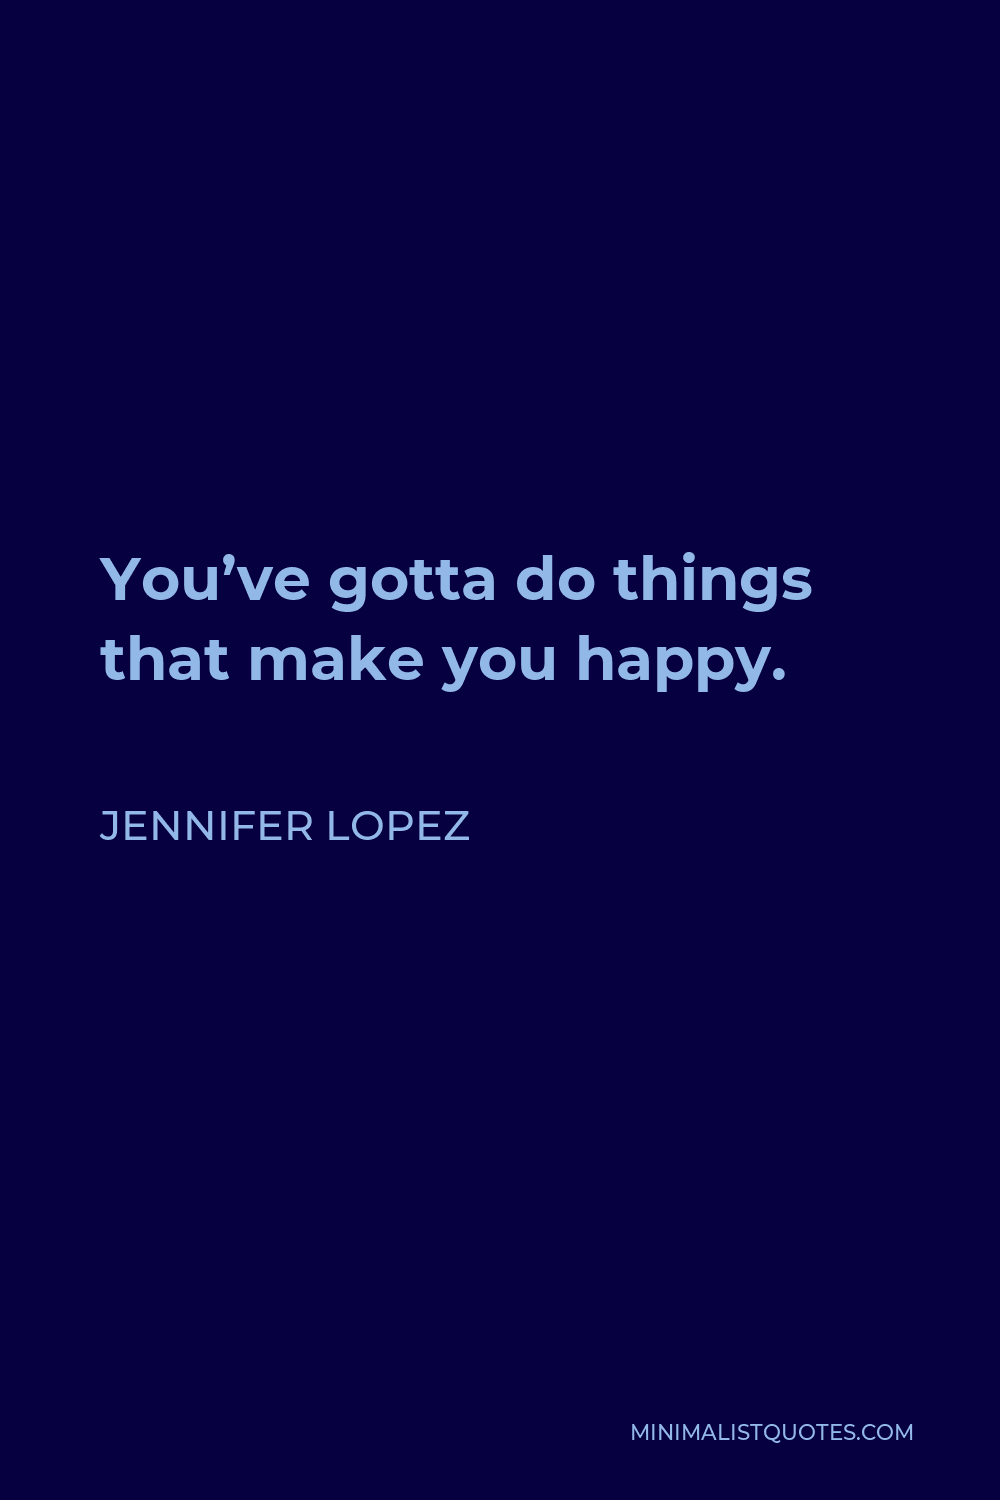 Jennifer Lopez Quote - You’ve gotta do things that make you happy. As women, we tend to give away a lot. We take care of a lot of people, and we can’t forget to take care of ourselves.